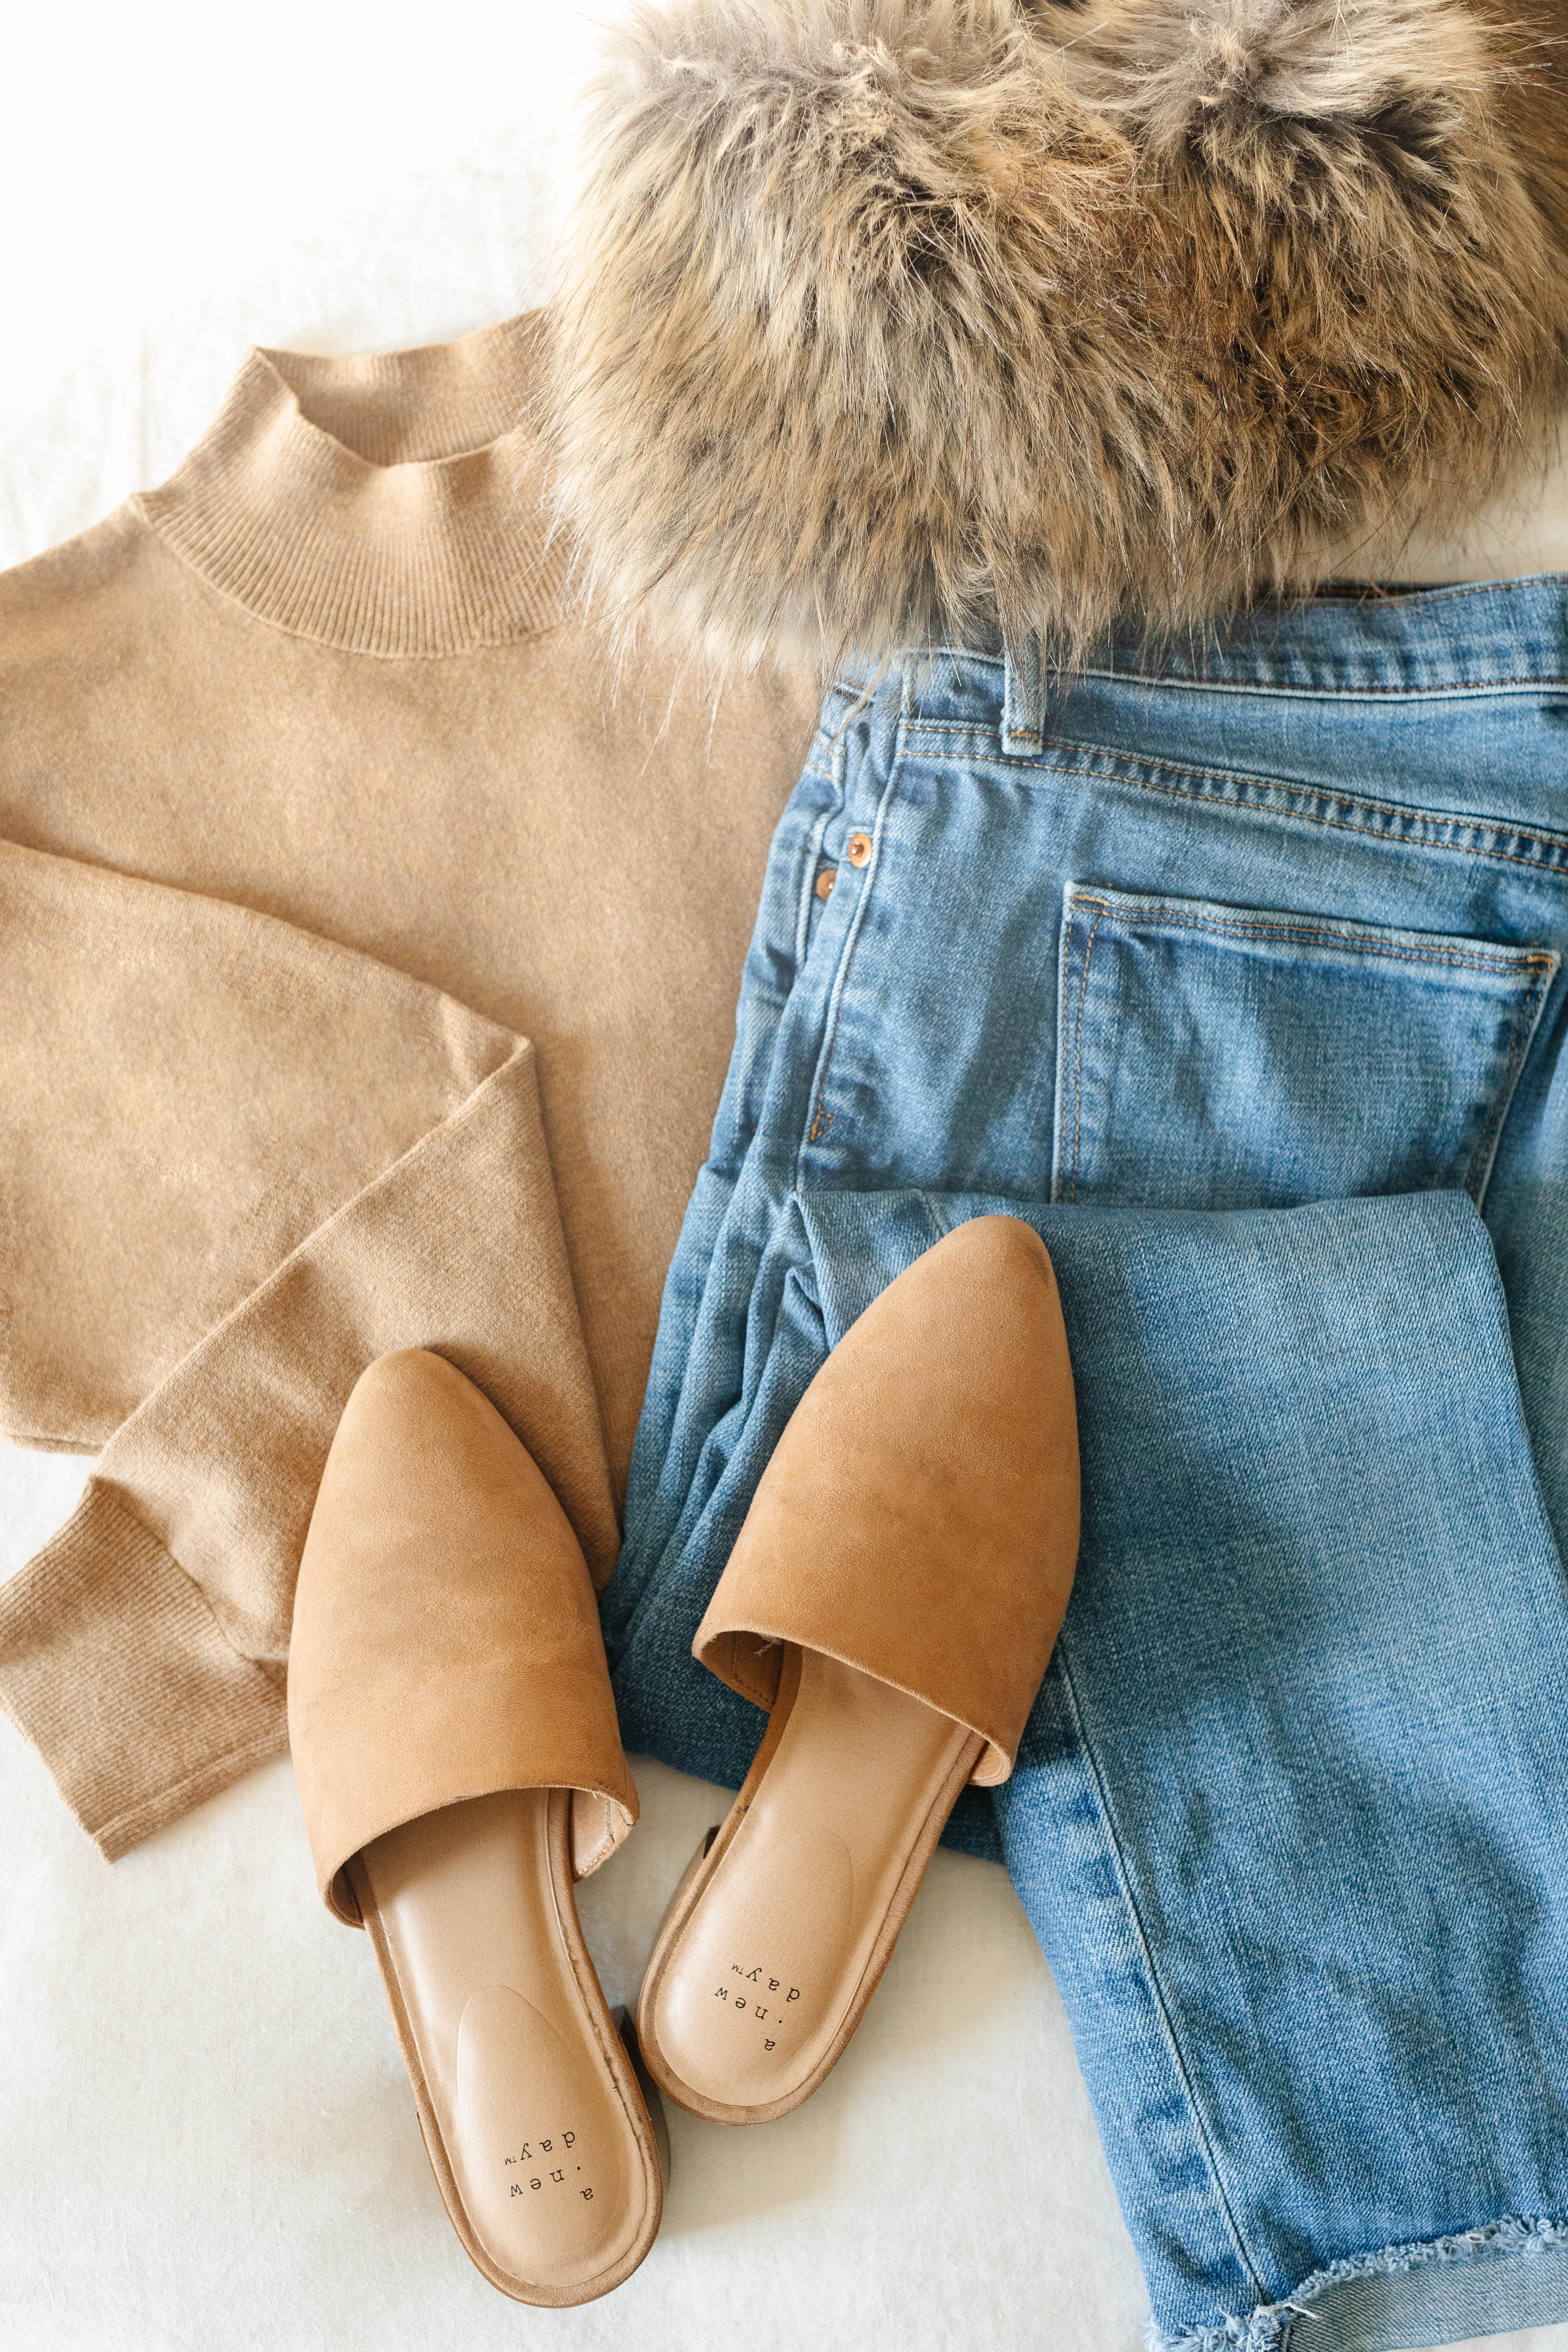 Winter outfit inspiration with brown sweater, blue jeans, fur scarf, and brown slip-on shoes.